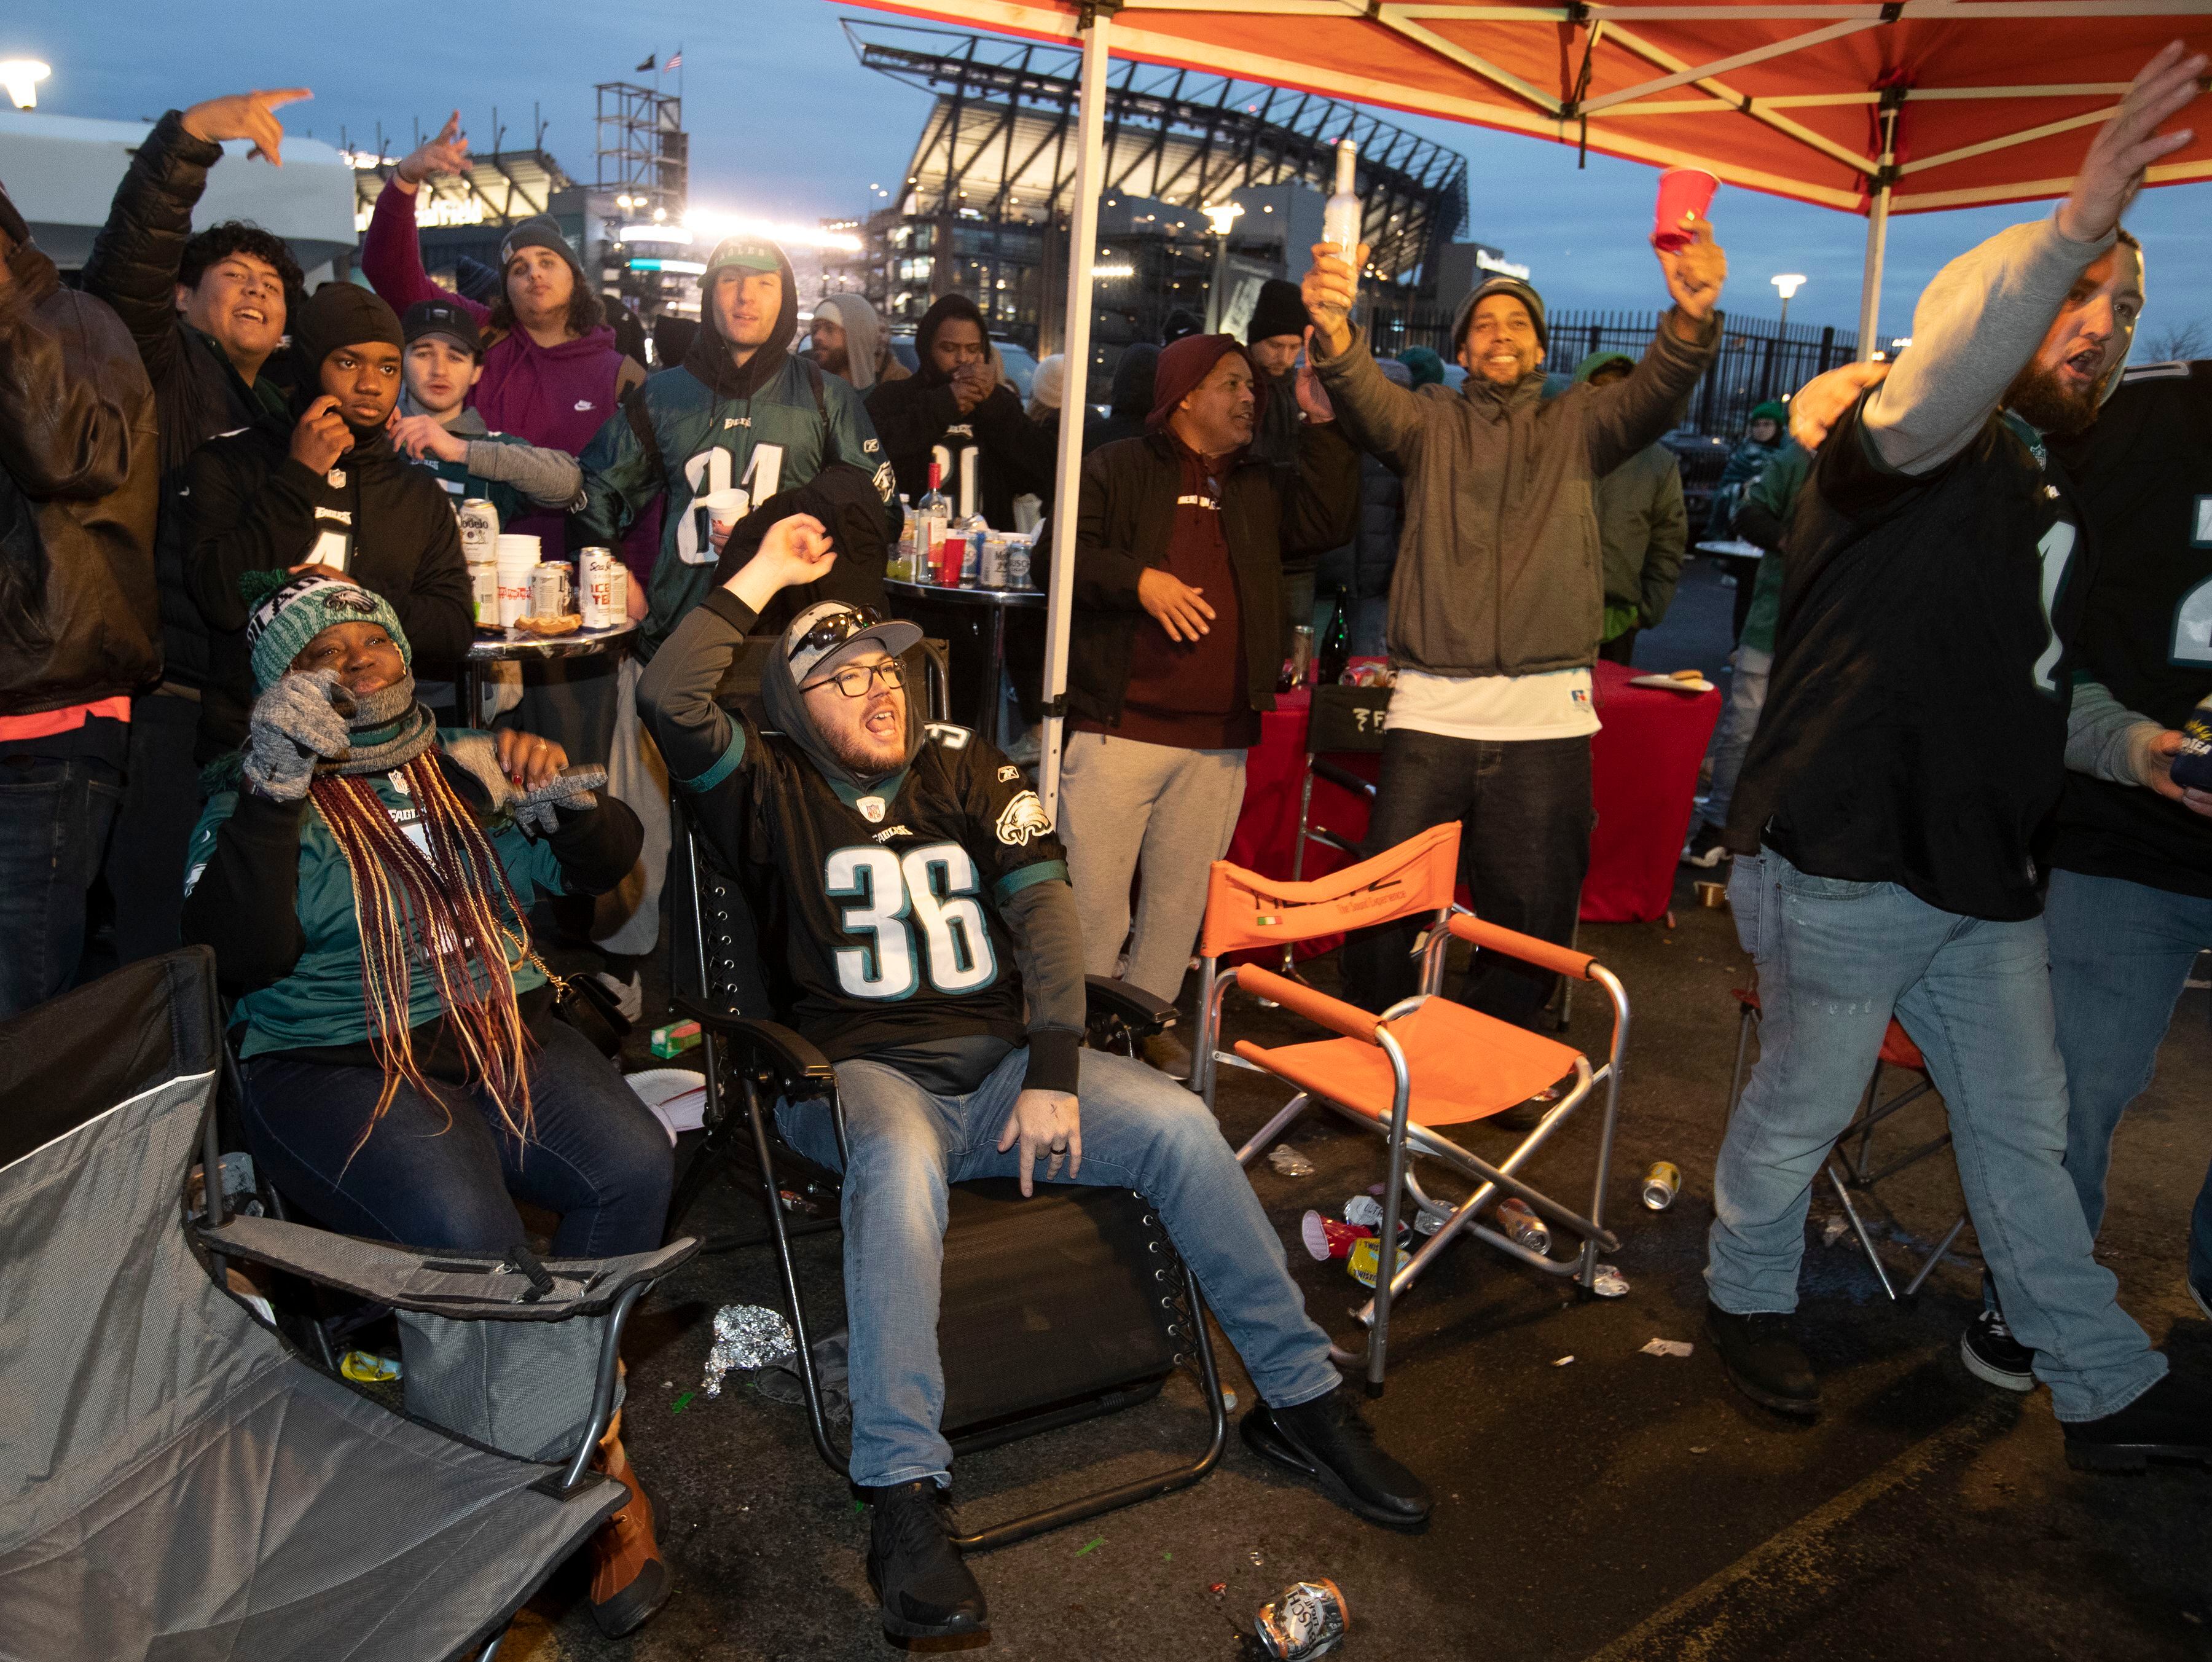 Photos of a Super Bowl Tailgate Show How Much America Loves Football